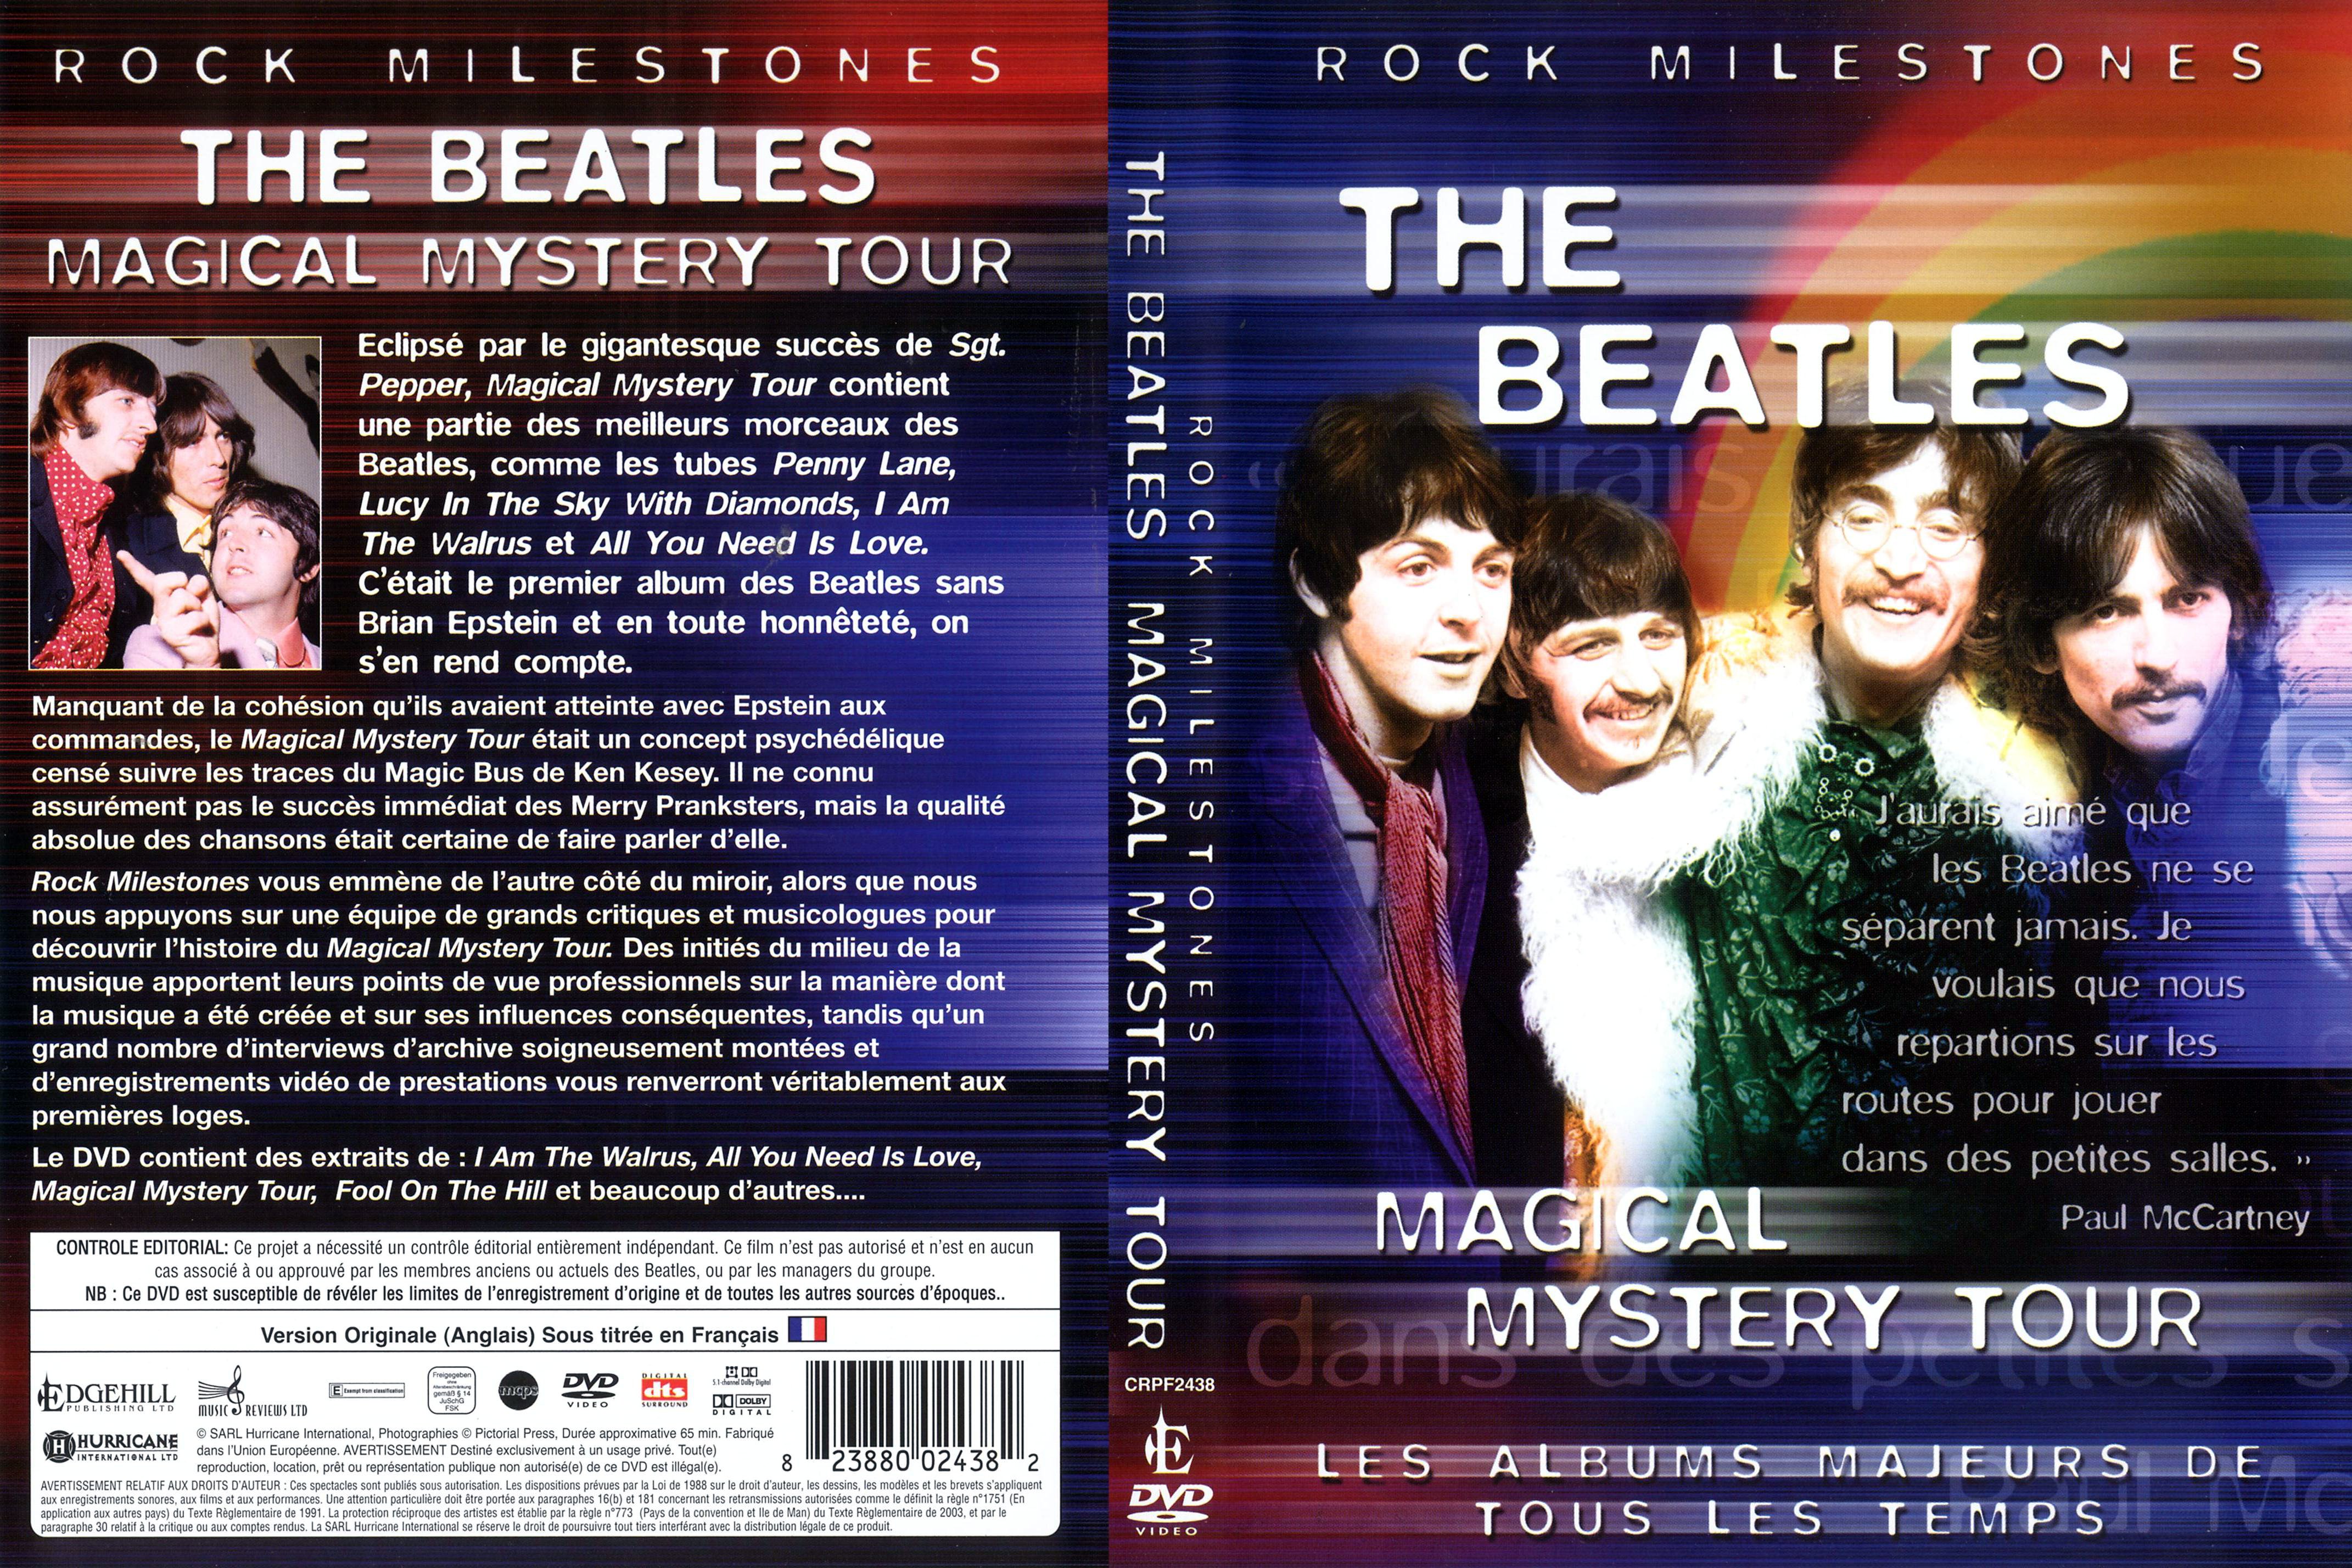 Jaquette DVD The Beatles - Magical mystery to